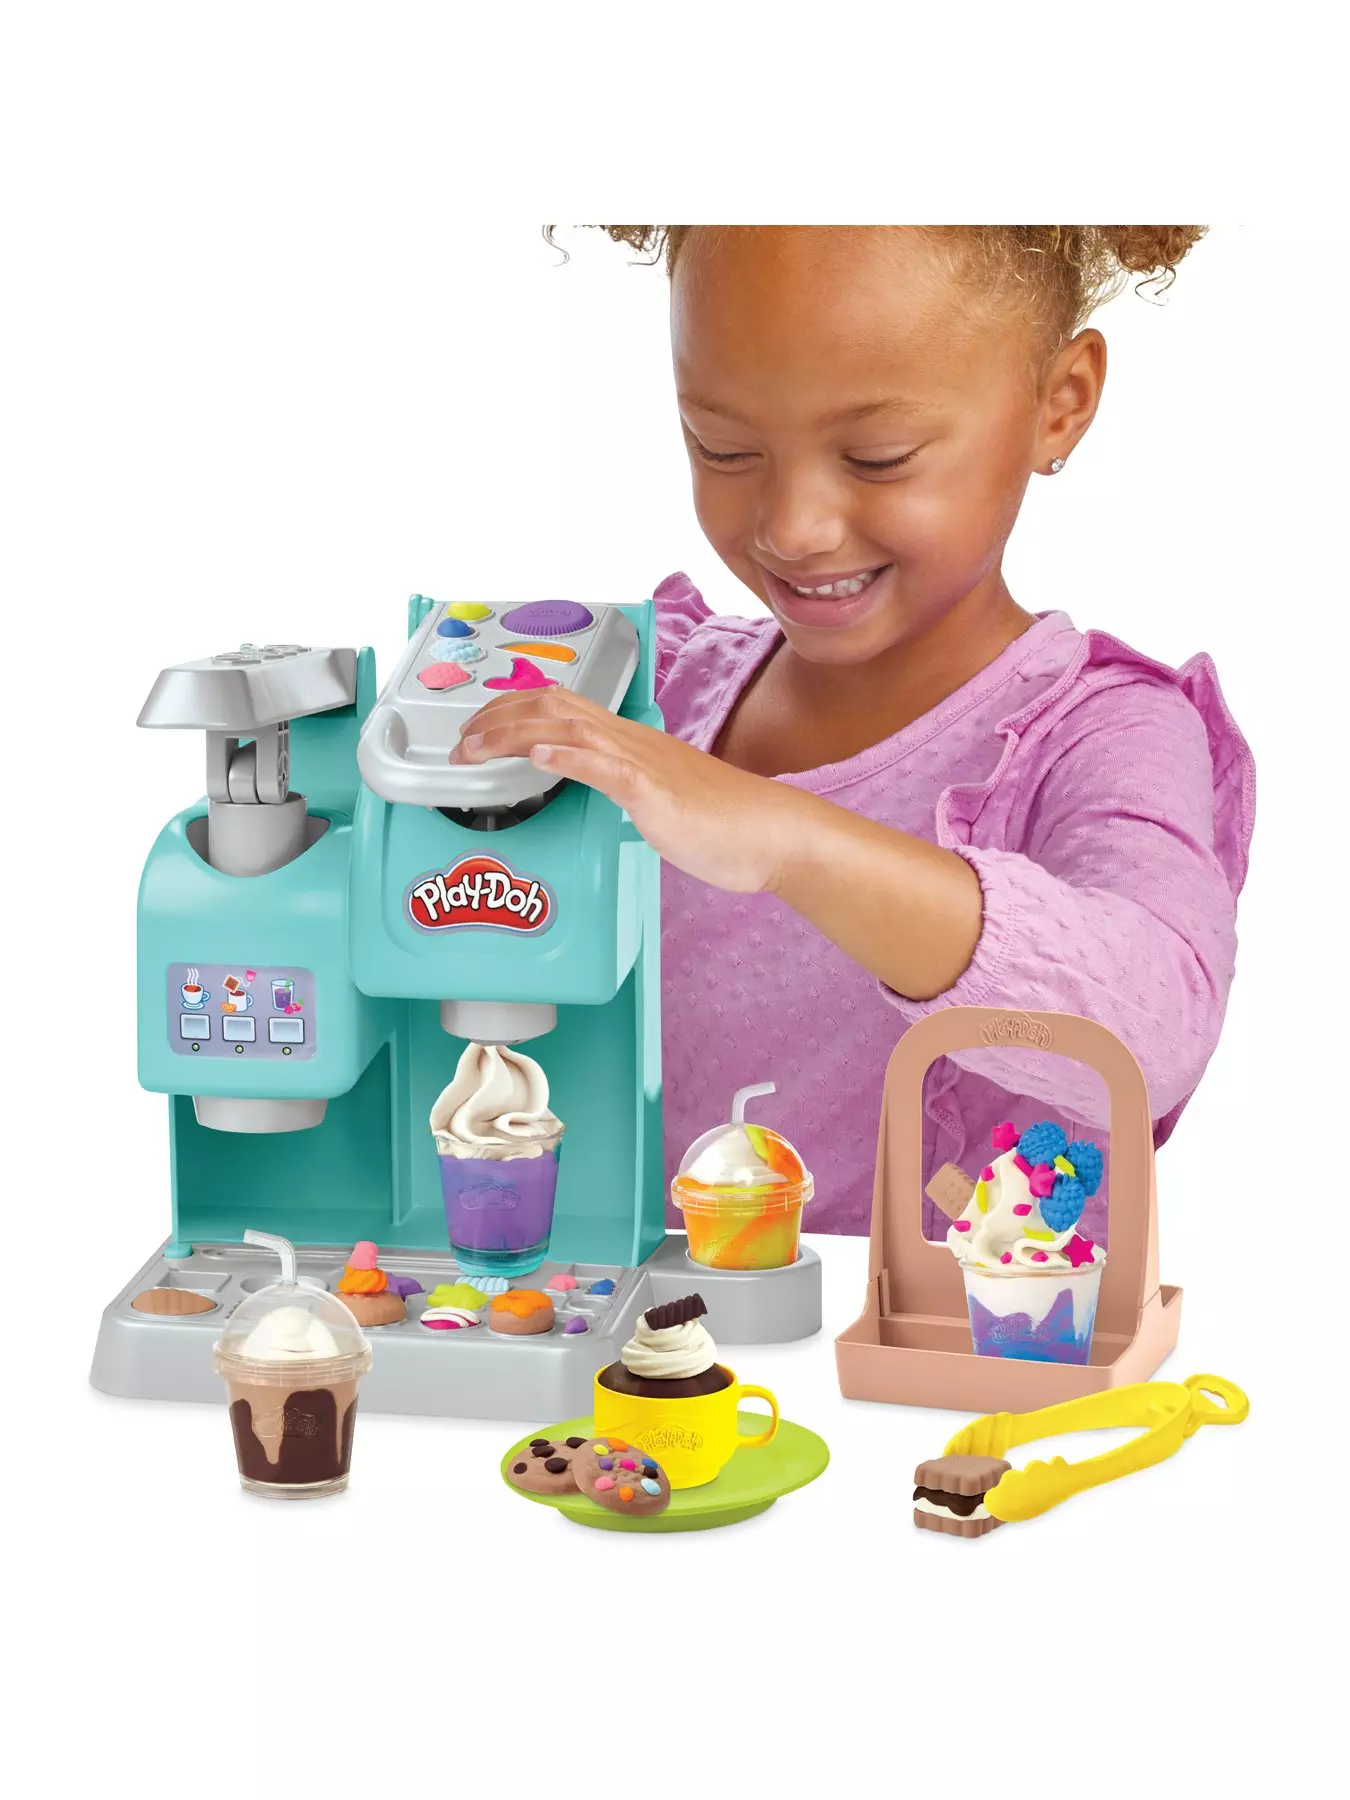 PLAY Kitchen Creation Cafe Play Dough Sets for Kids, Playdough Tools, Play  Dough Coffee Maker Set, Toy Kitchen Playset Play Food, Arts and Crafts for